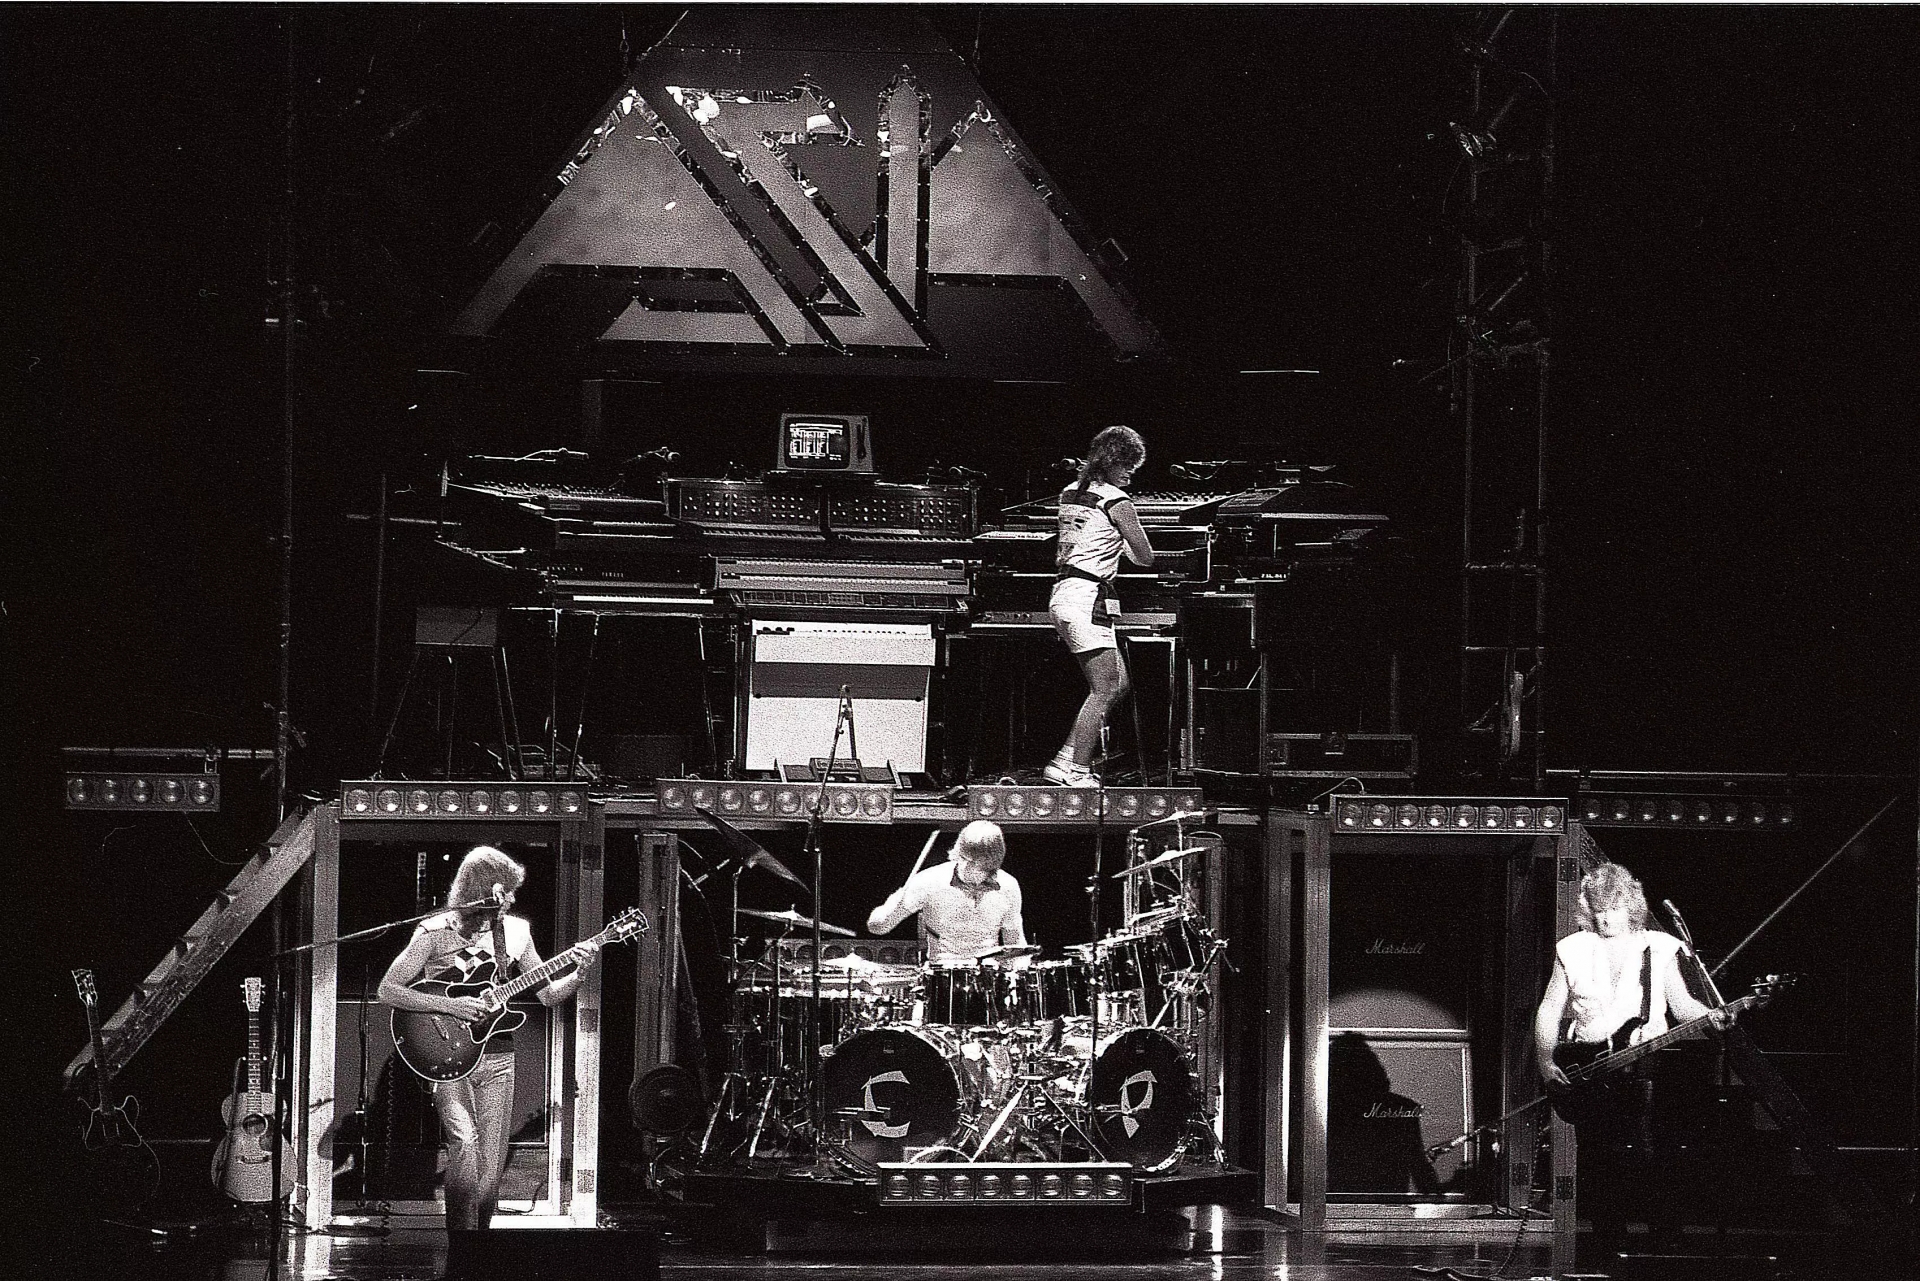 British arena rock supergroup Asia perform live in Germany in 1982 [L-R Steve Howe (guitar), Carl Palmer (drums), Geoff Downes (keyboards), John Wetton (bass, lead vocals).